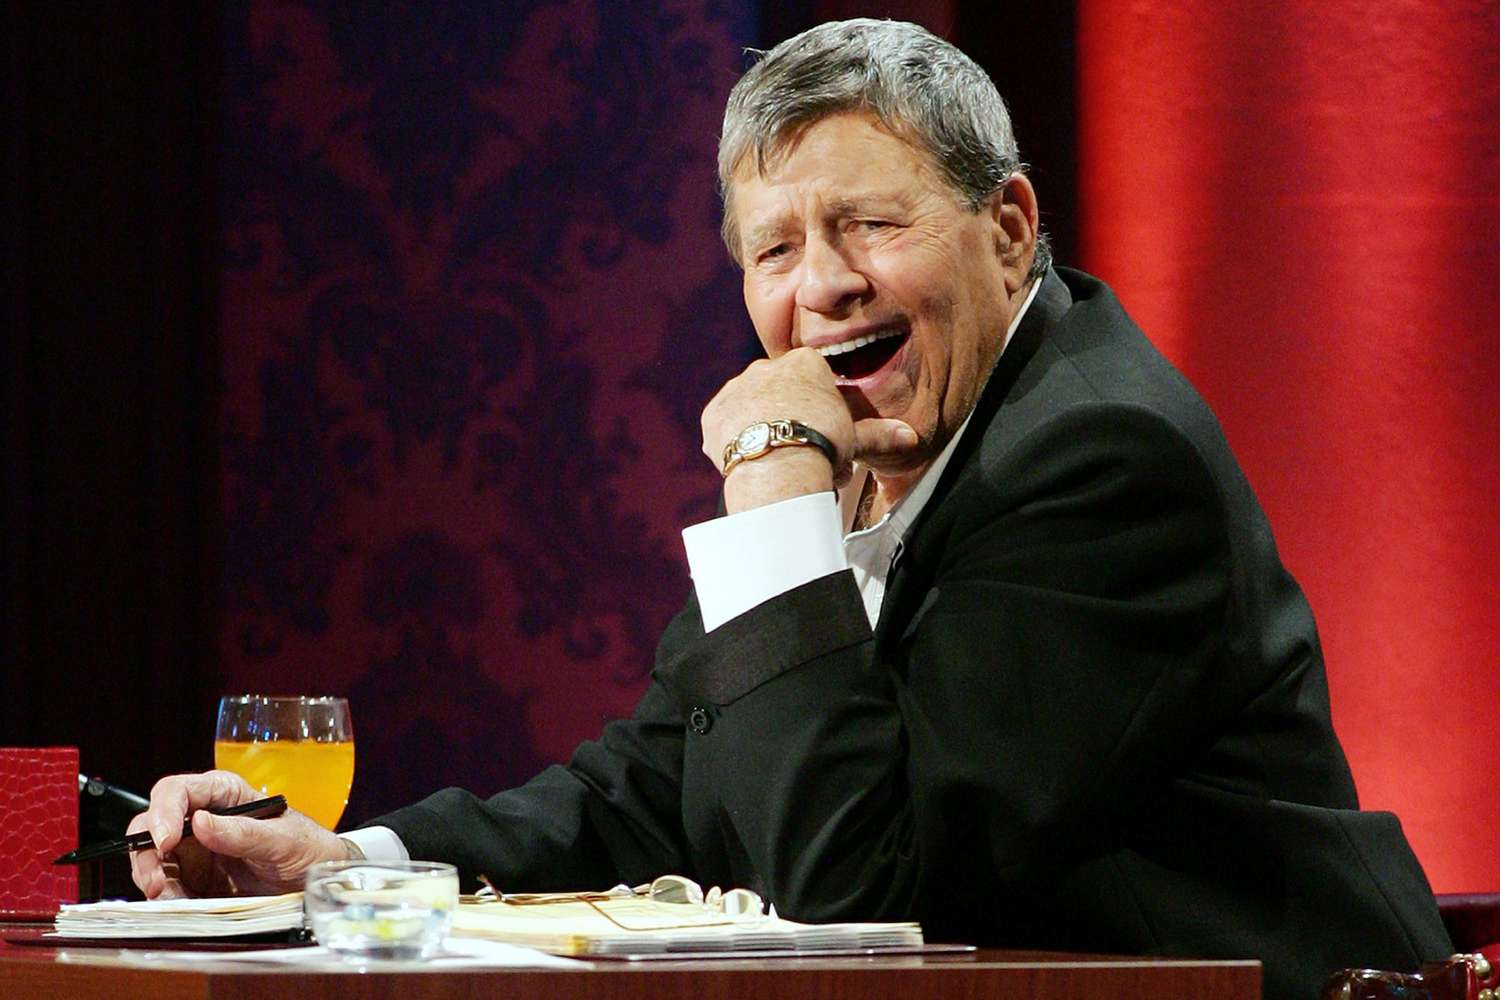 Jerry Lewis Labor Day Muscular Dystrophy Association Telethon